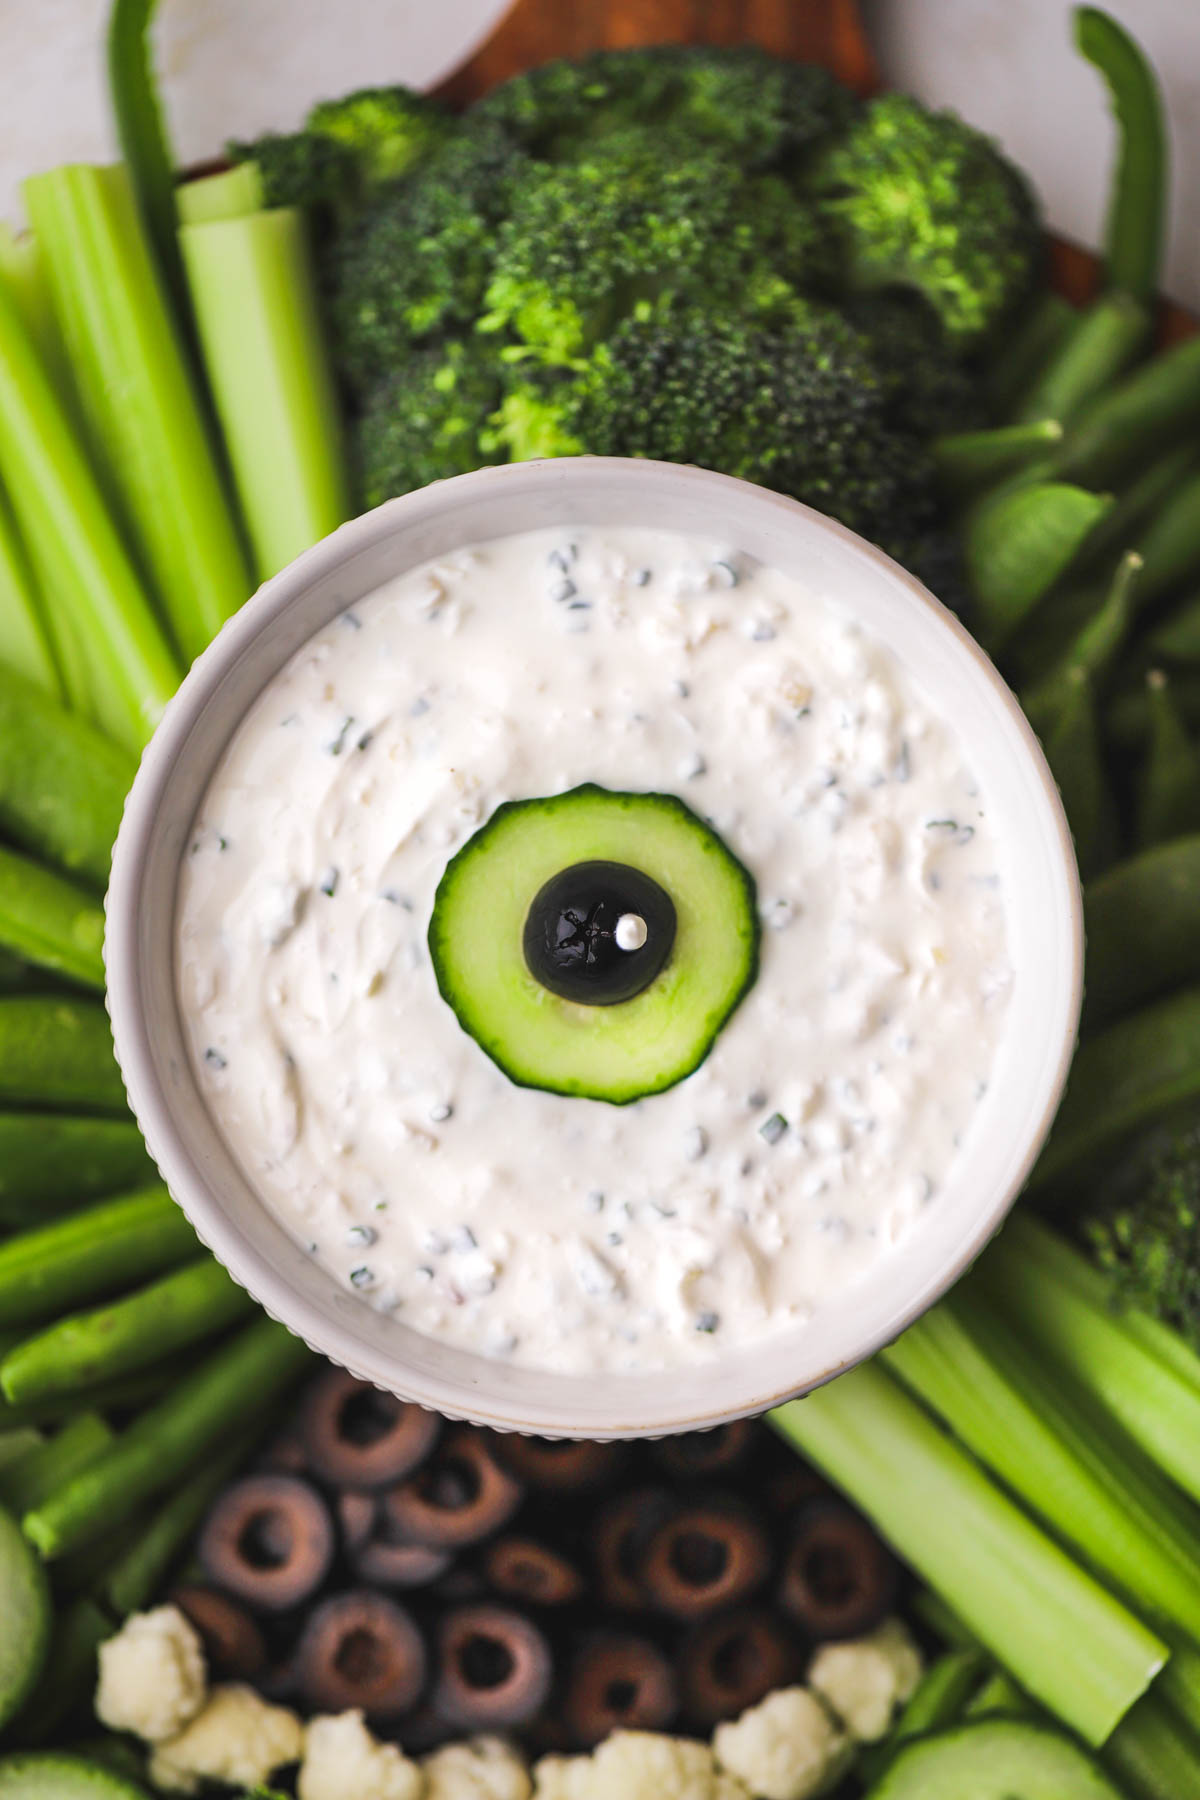 Sour cream and chive dip with Monsters Inc eye ball.